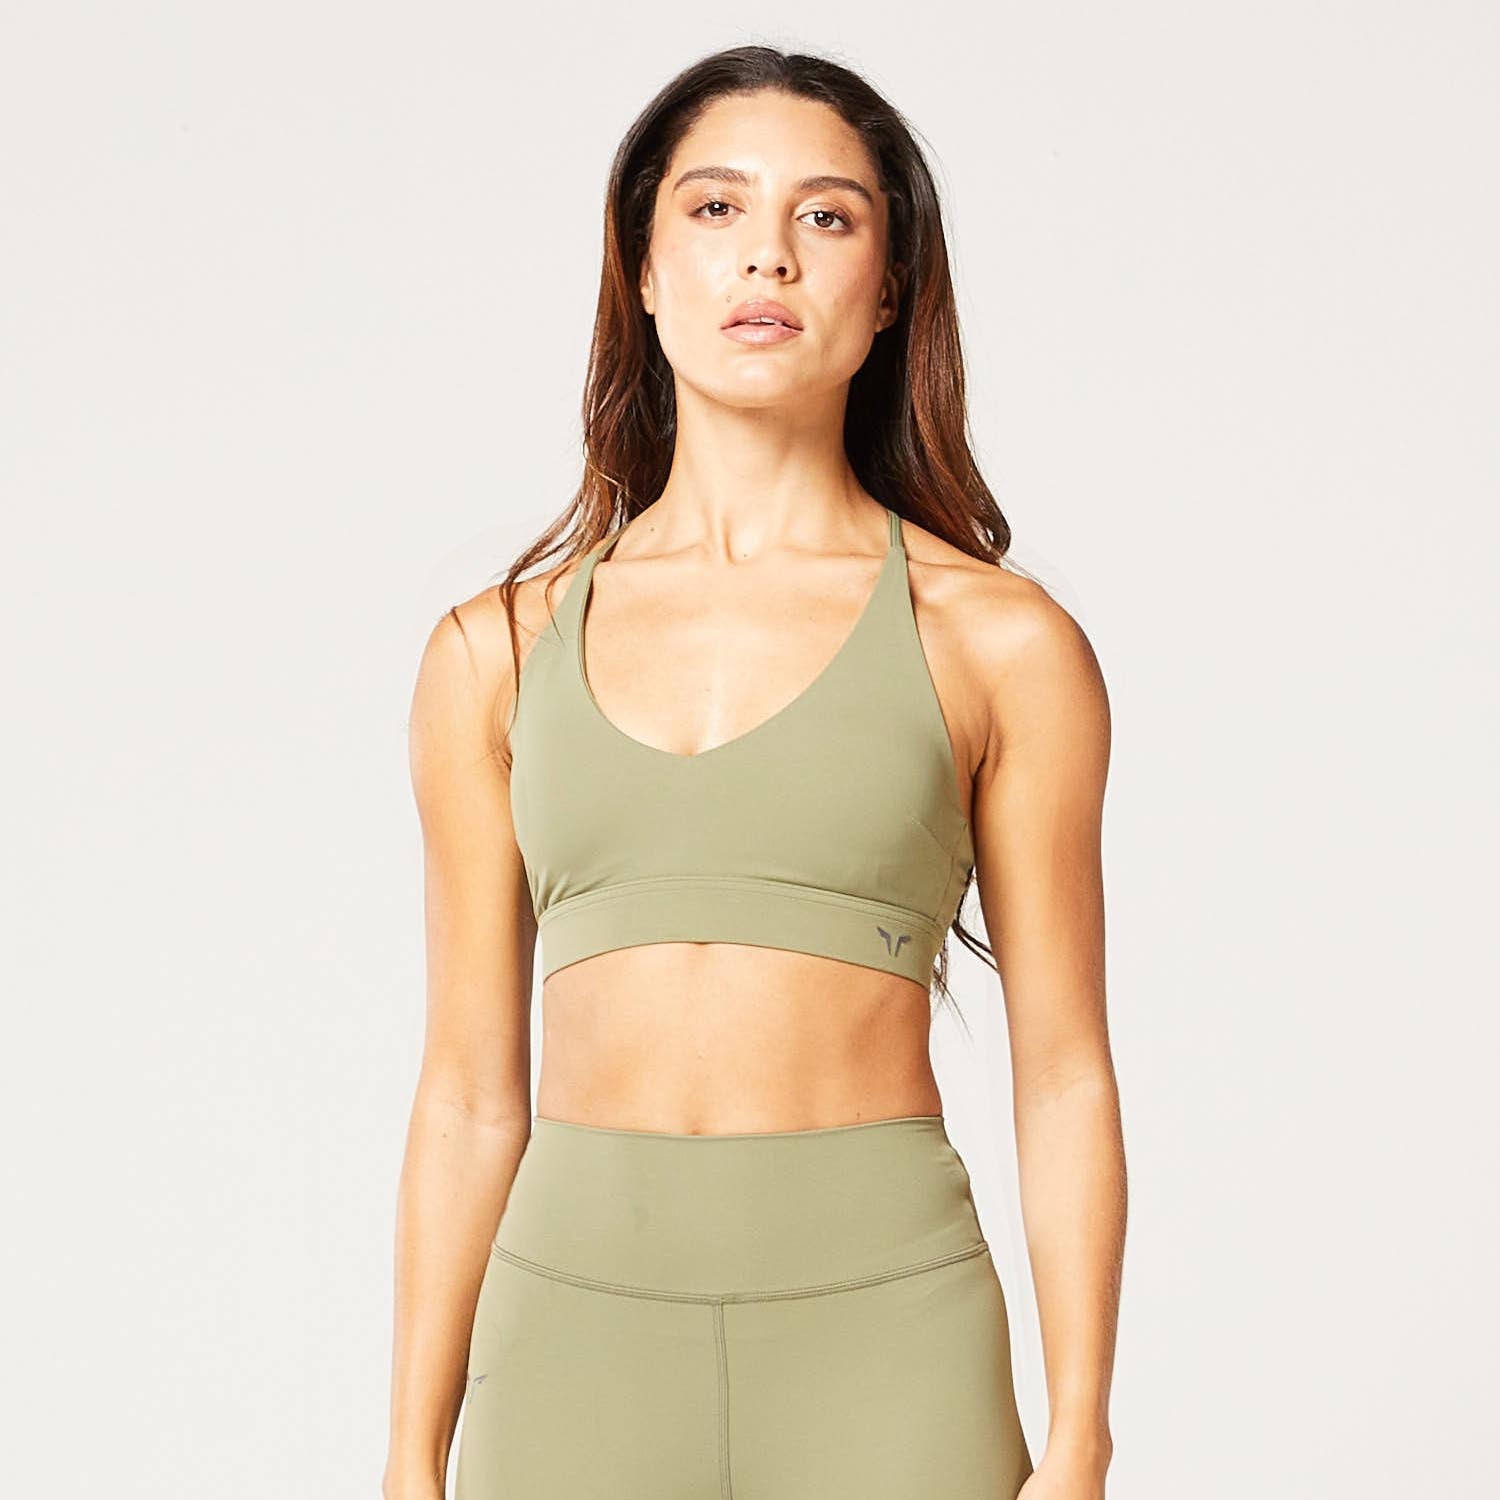 squatwolf-workout-clothes-code-live-in-bra-green-sports-bra-for-gym